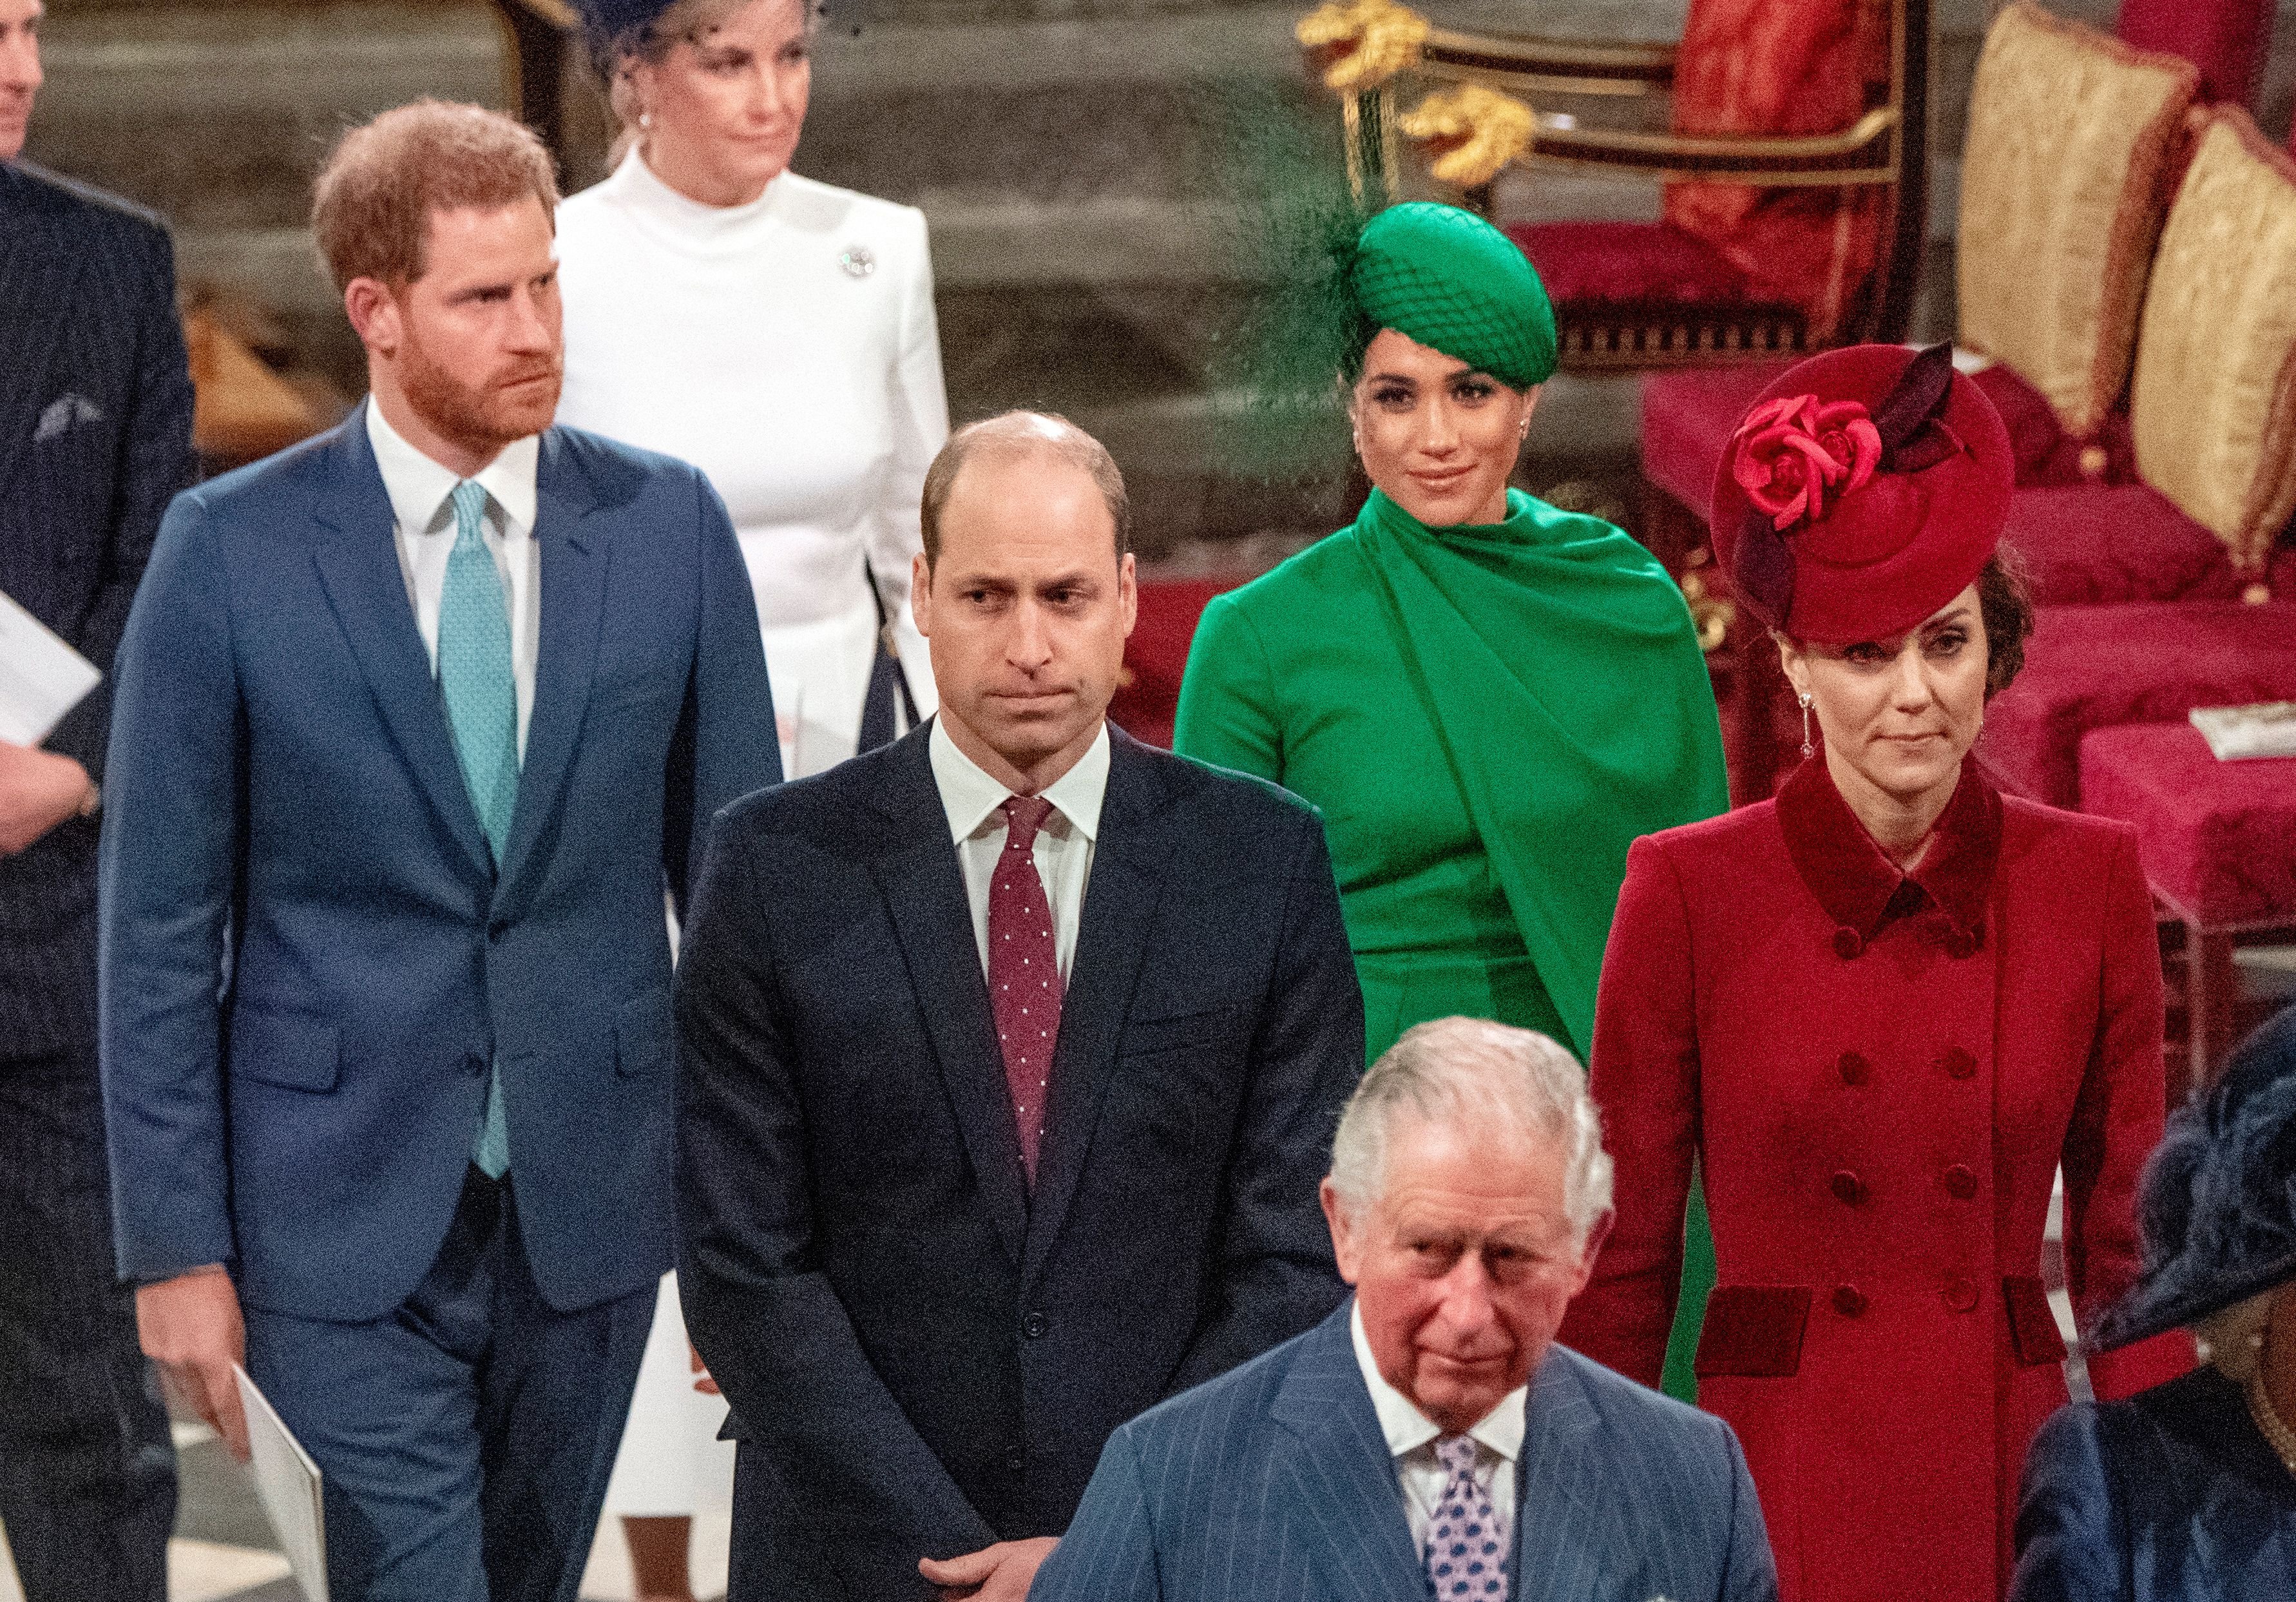 Britain's Prince Harry, Duke of Sussex (L) and Britain's Meghan, Duchess of Sussex (2nd R) follow Britain's Prince William, Duke of Cambridge (C) and Britain's Catherine, Duchess of Cambridge (R) as they depart Westminster Abbey after attending the annual Commonwealth Service in London on March 9, 2020.  | Source: Getty Images